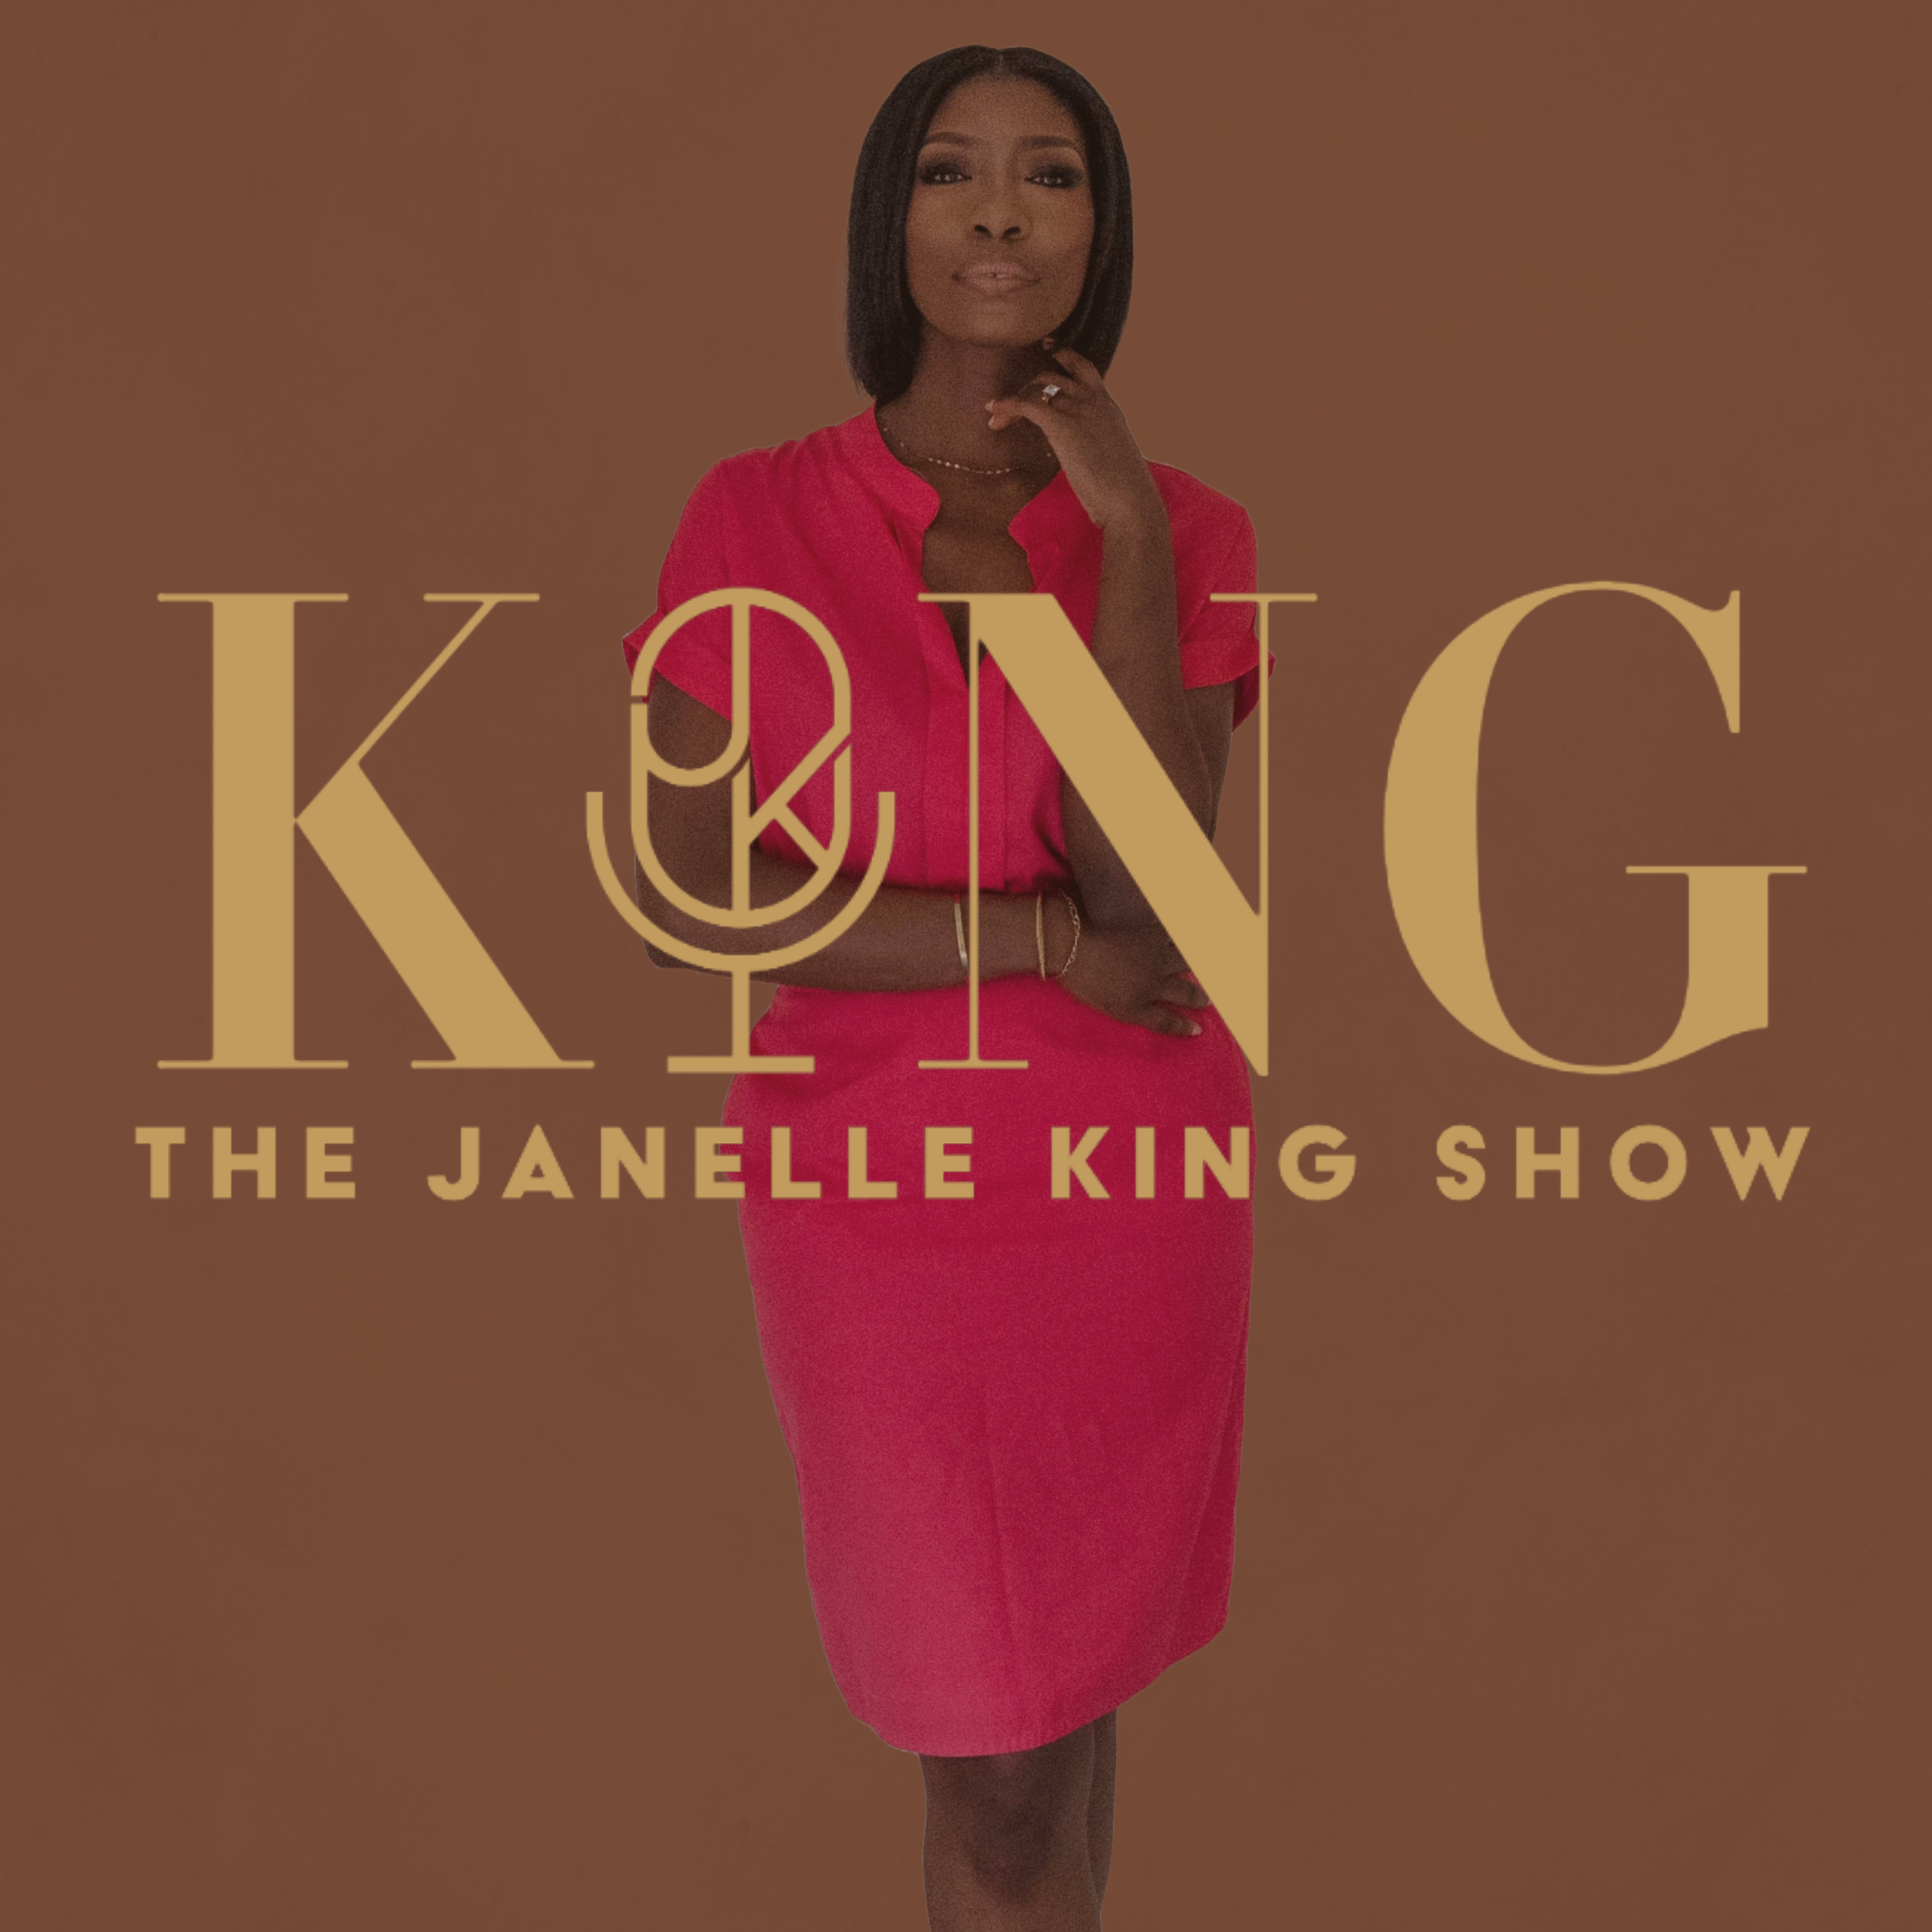 The Janelle King Show